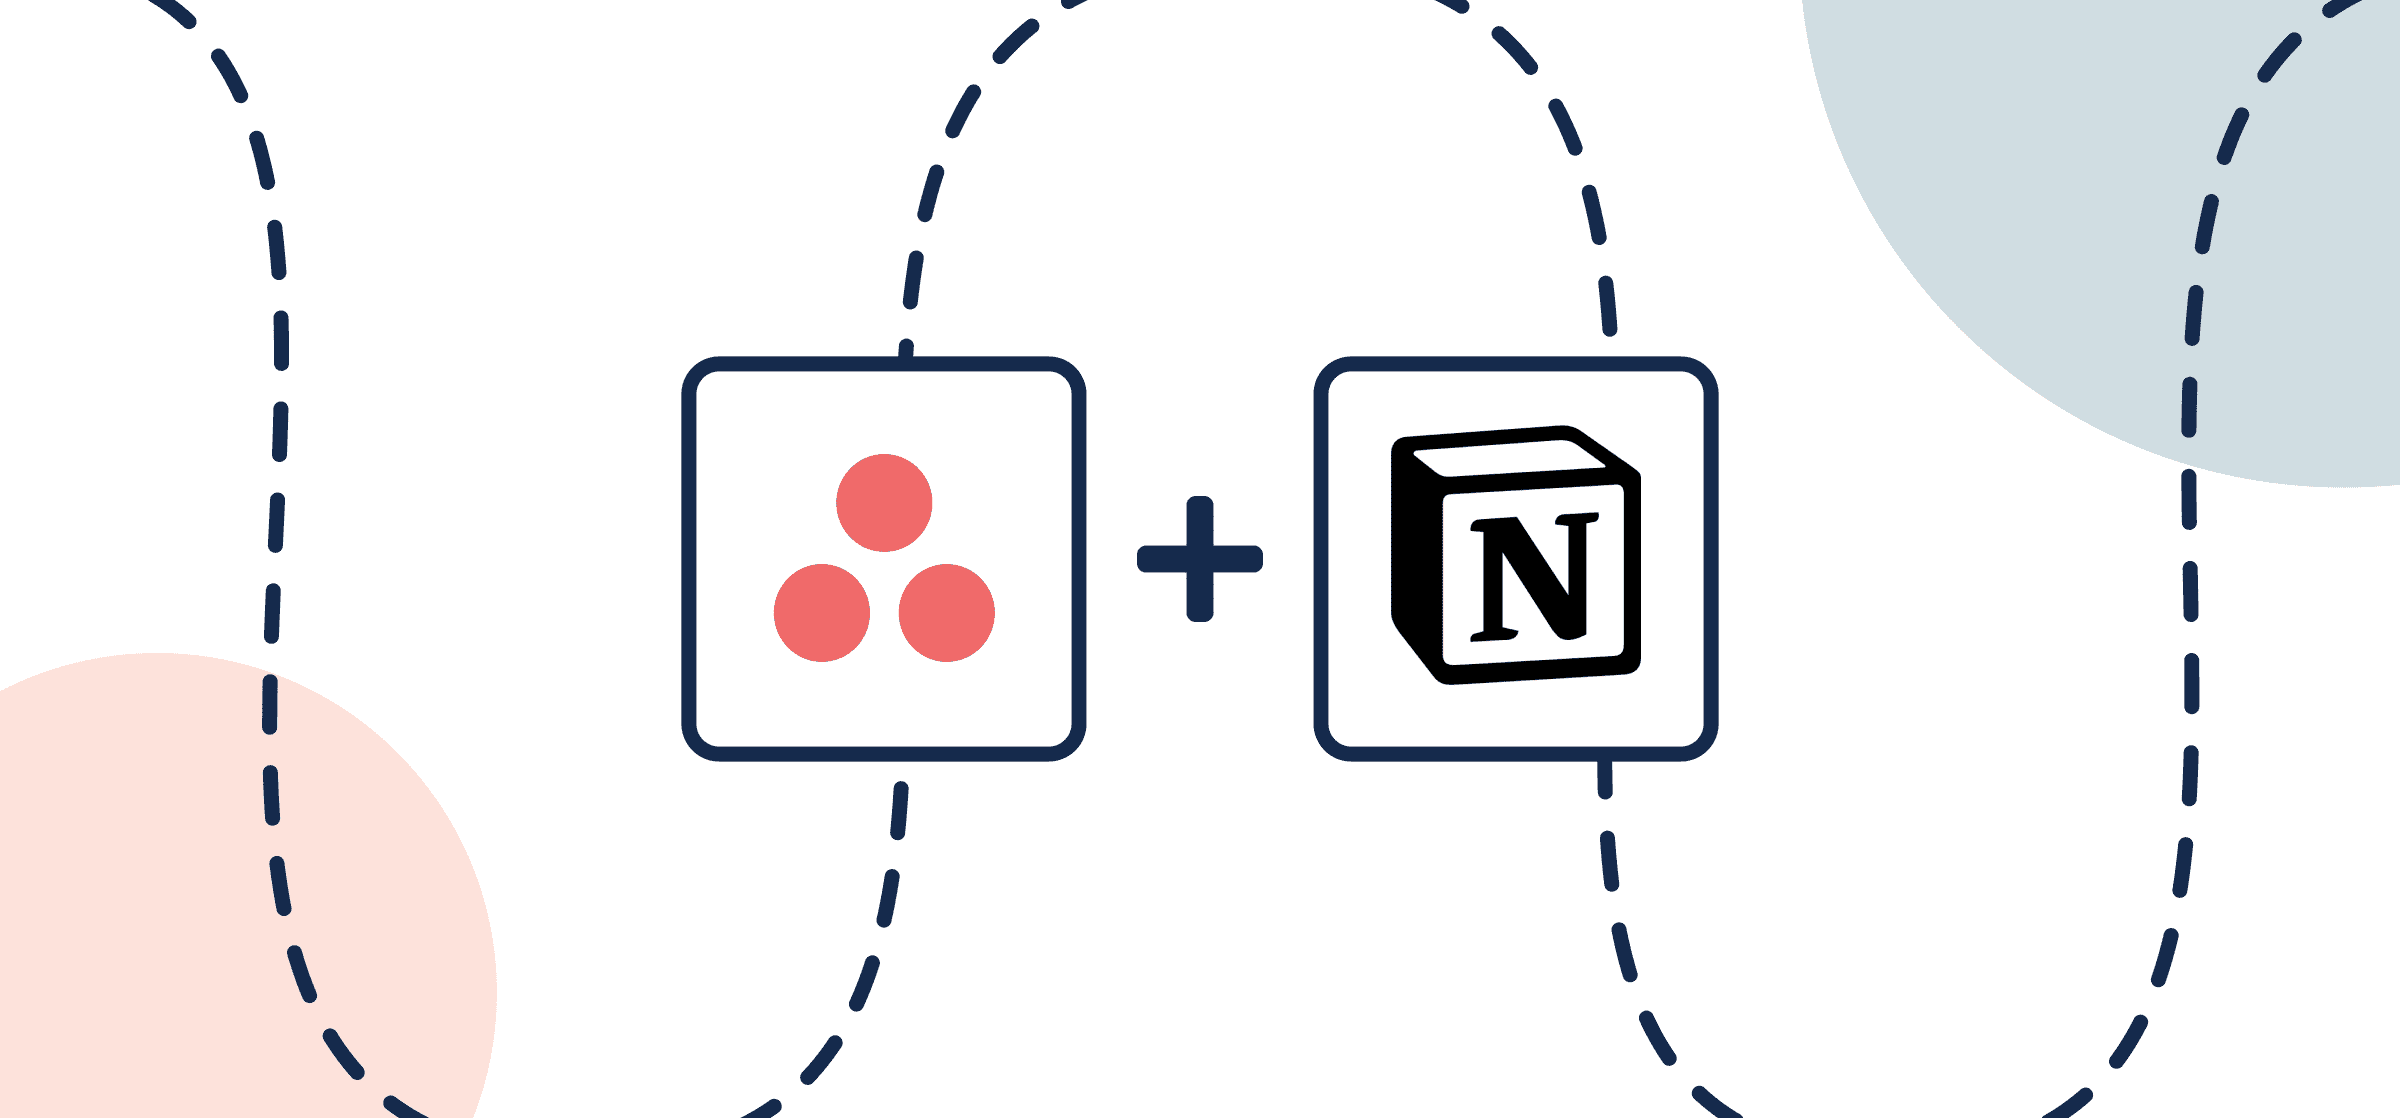 Featured image with Logos for Asana and Notion, representing Unito's guide to syncing Asana and Notion work items with a 2-way integration.